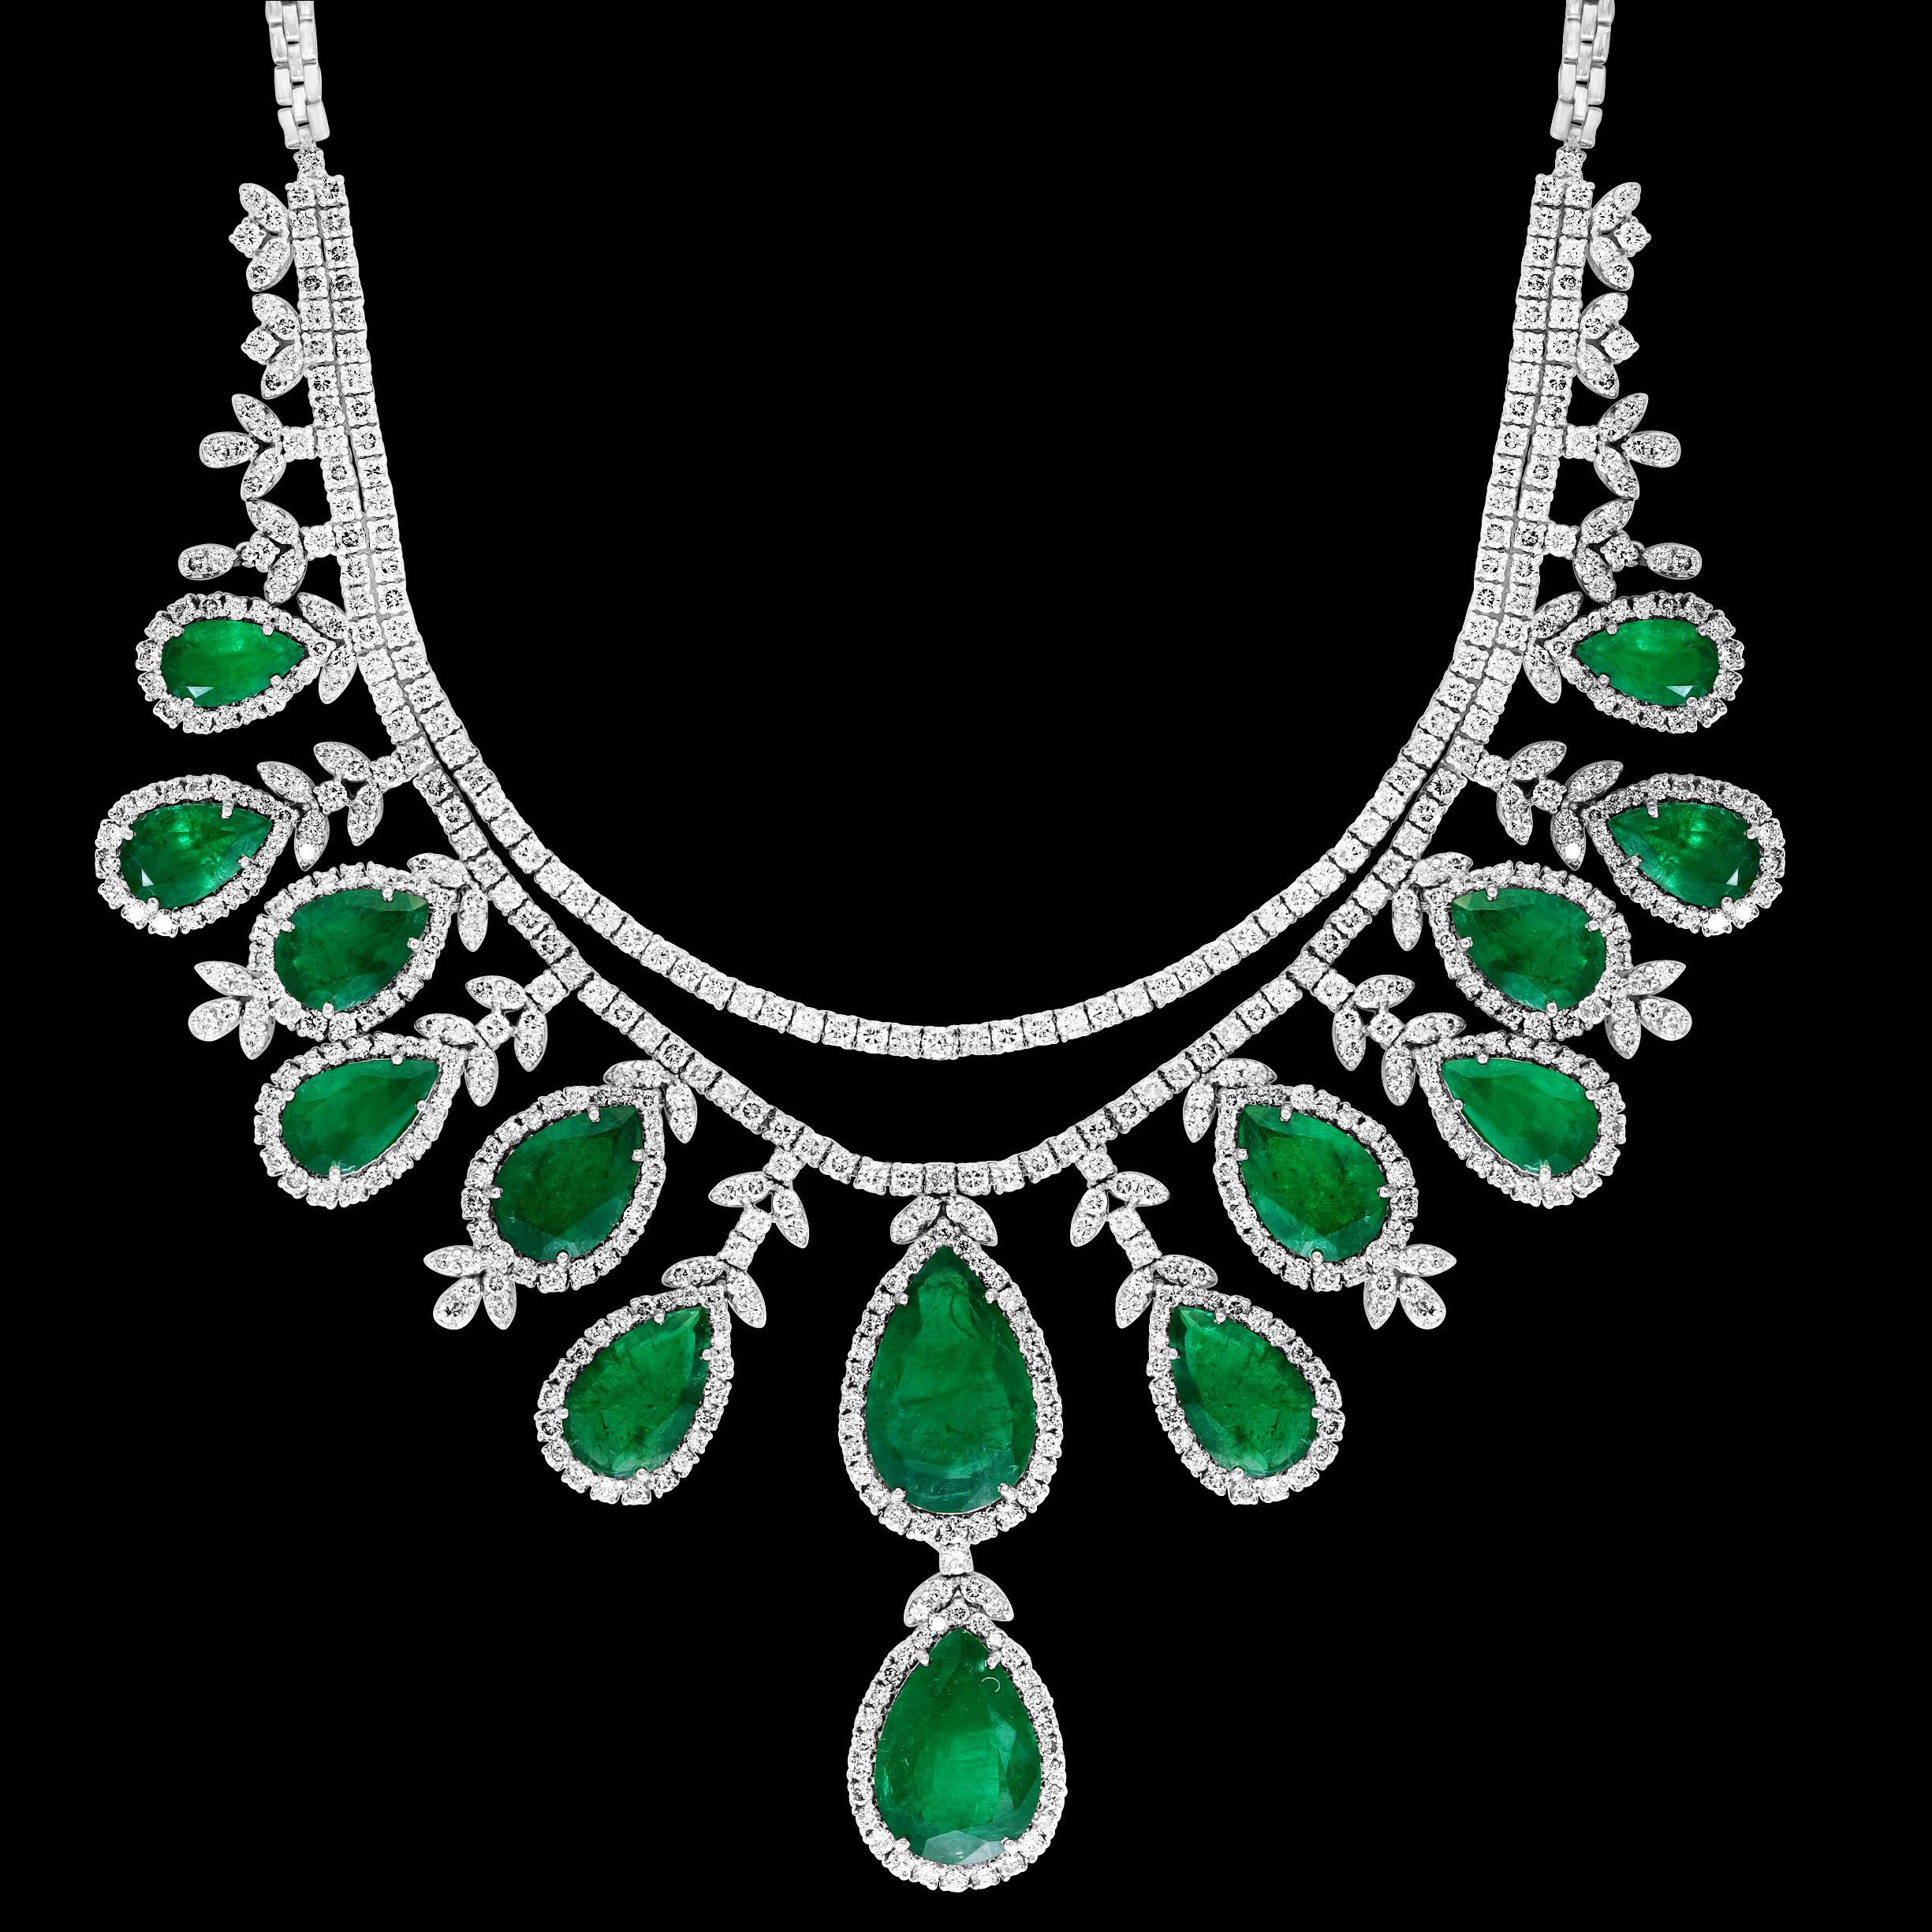 75 Ct Zambian Emerald and 30 Ct Diamond Necklace and Earring Bridal Suite For Sale 1